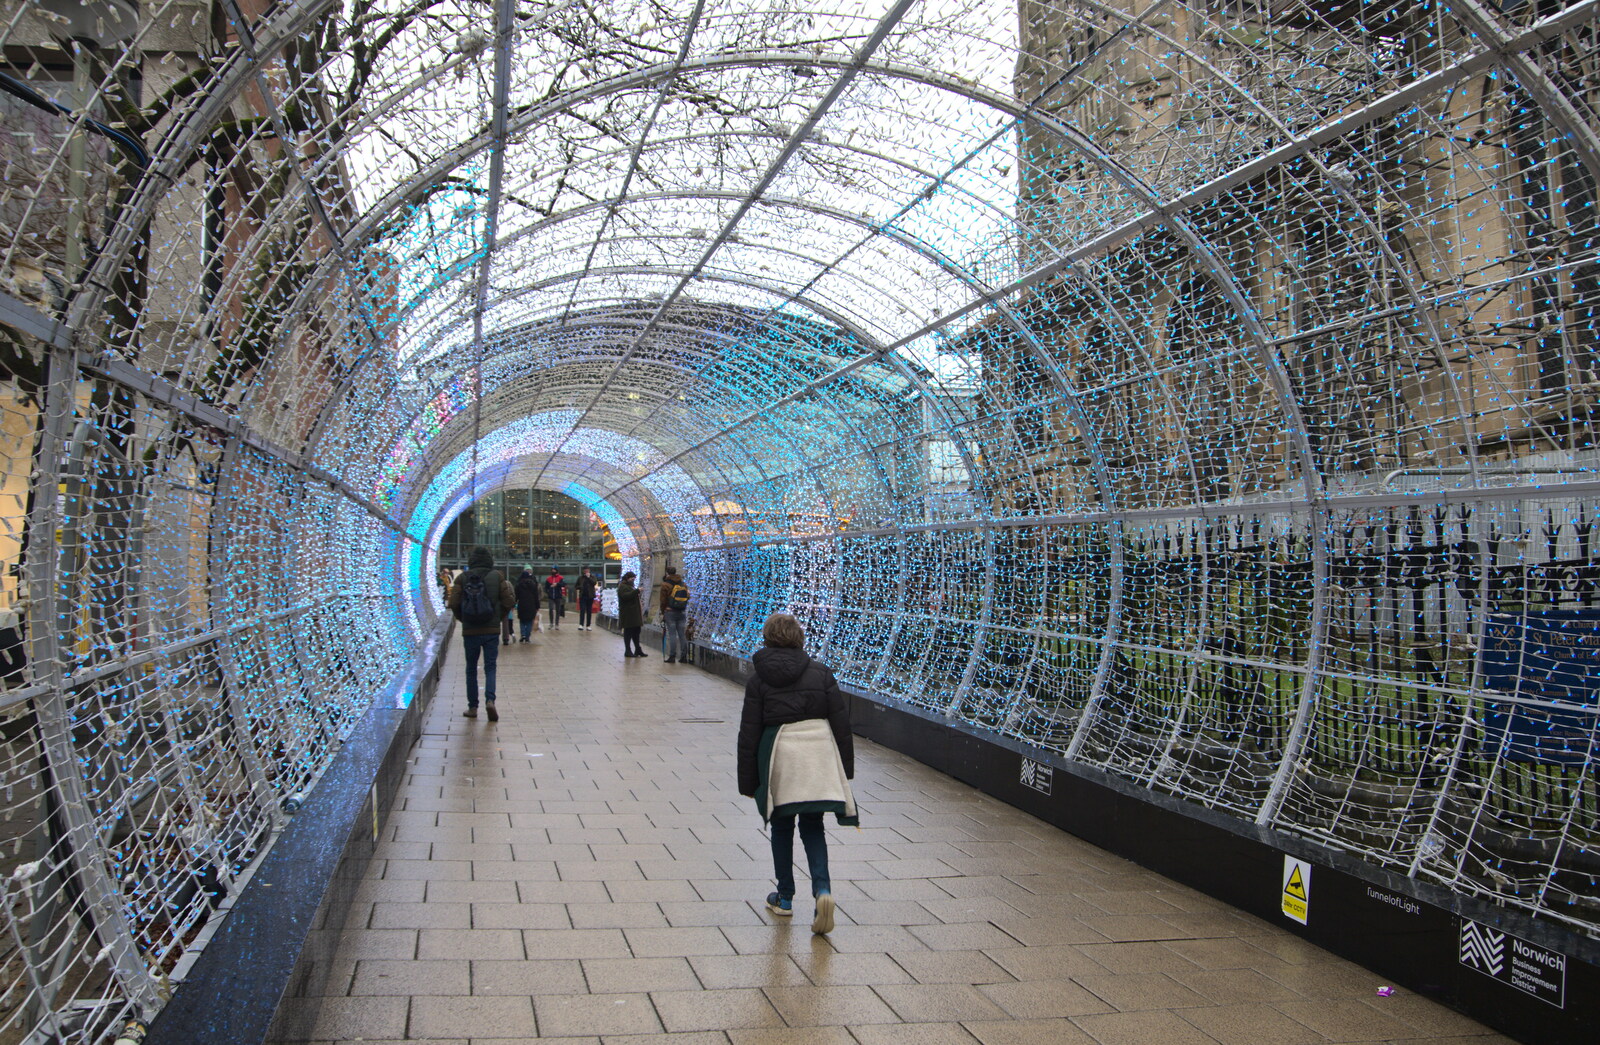 Fred stumps up the light tunnel from A Bit of Christmas Shopping, Norwich, Norfolk - 23rd December 2020